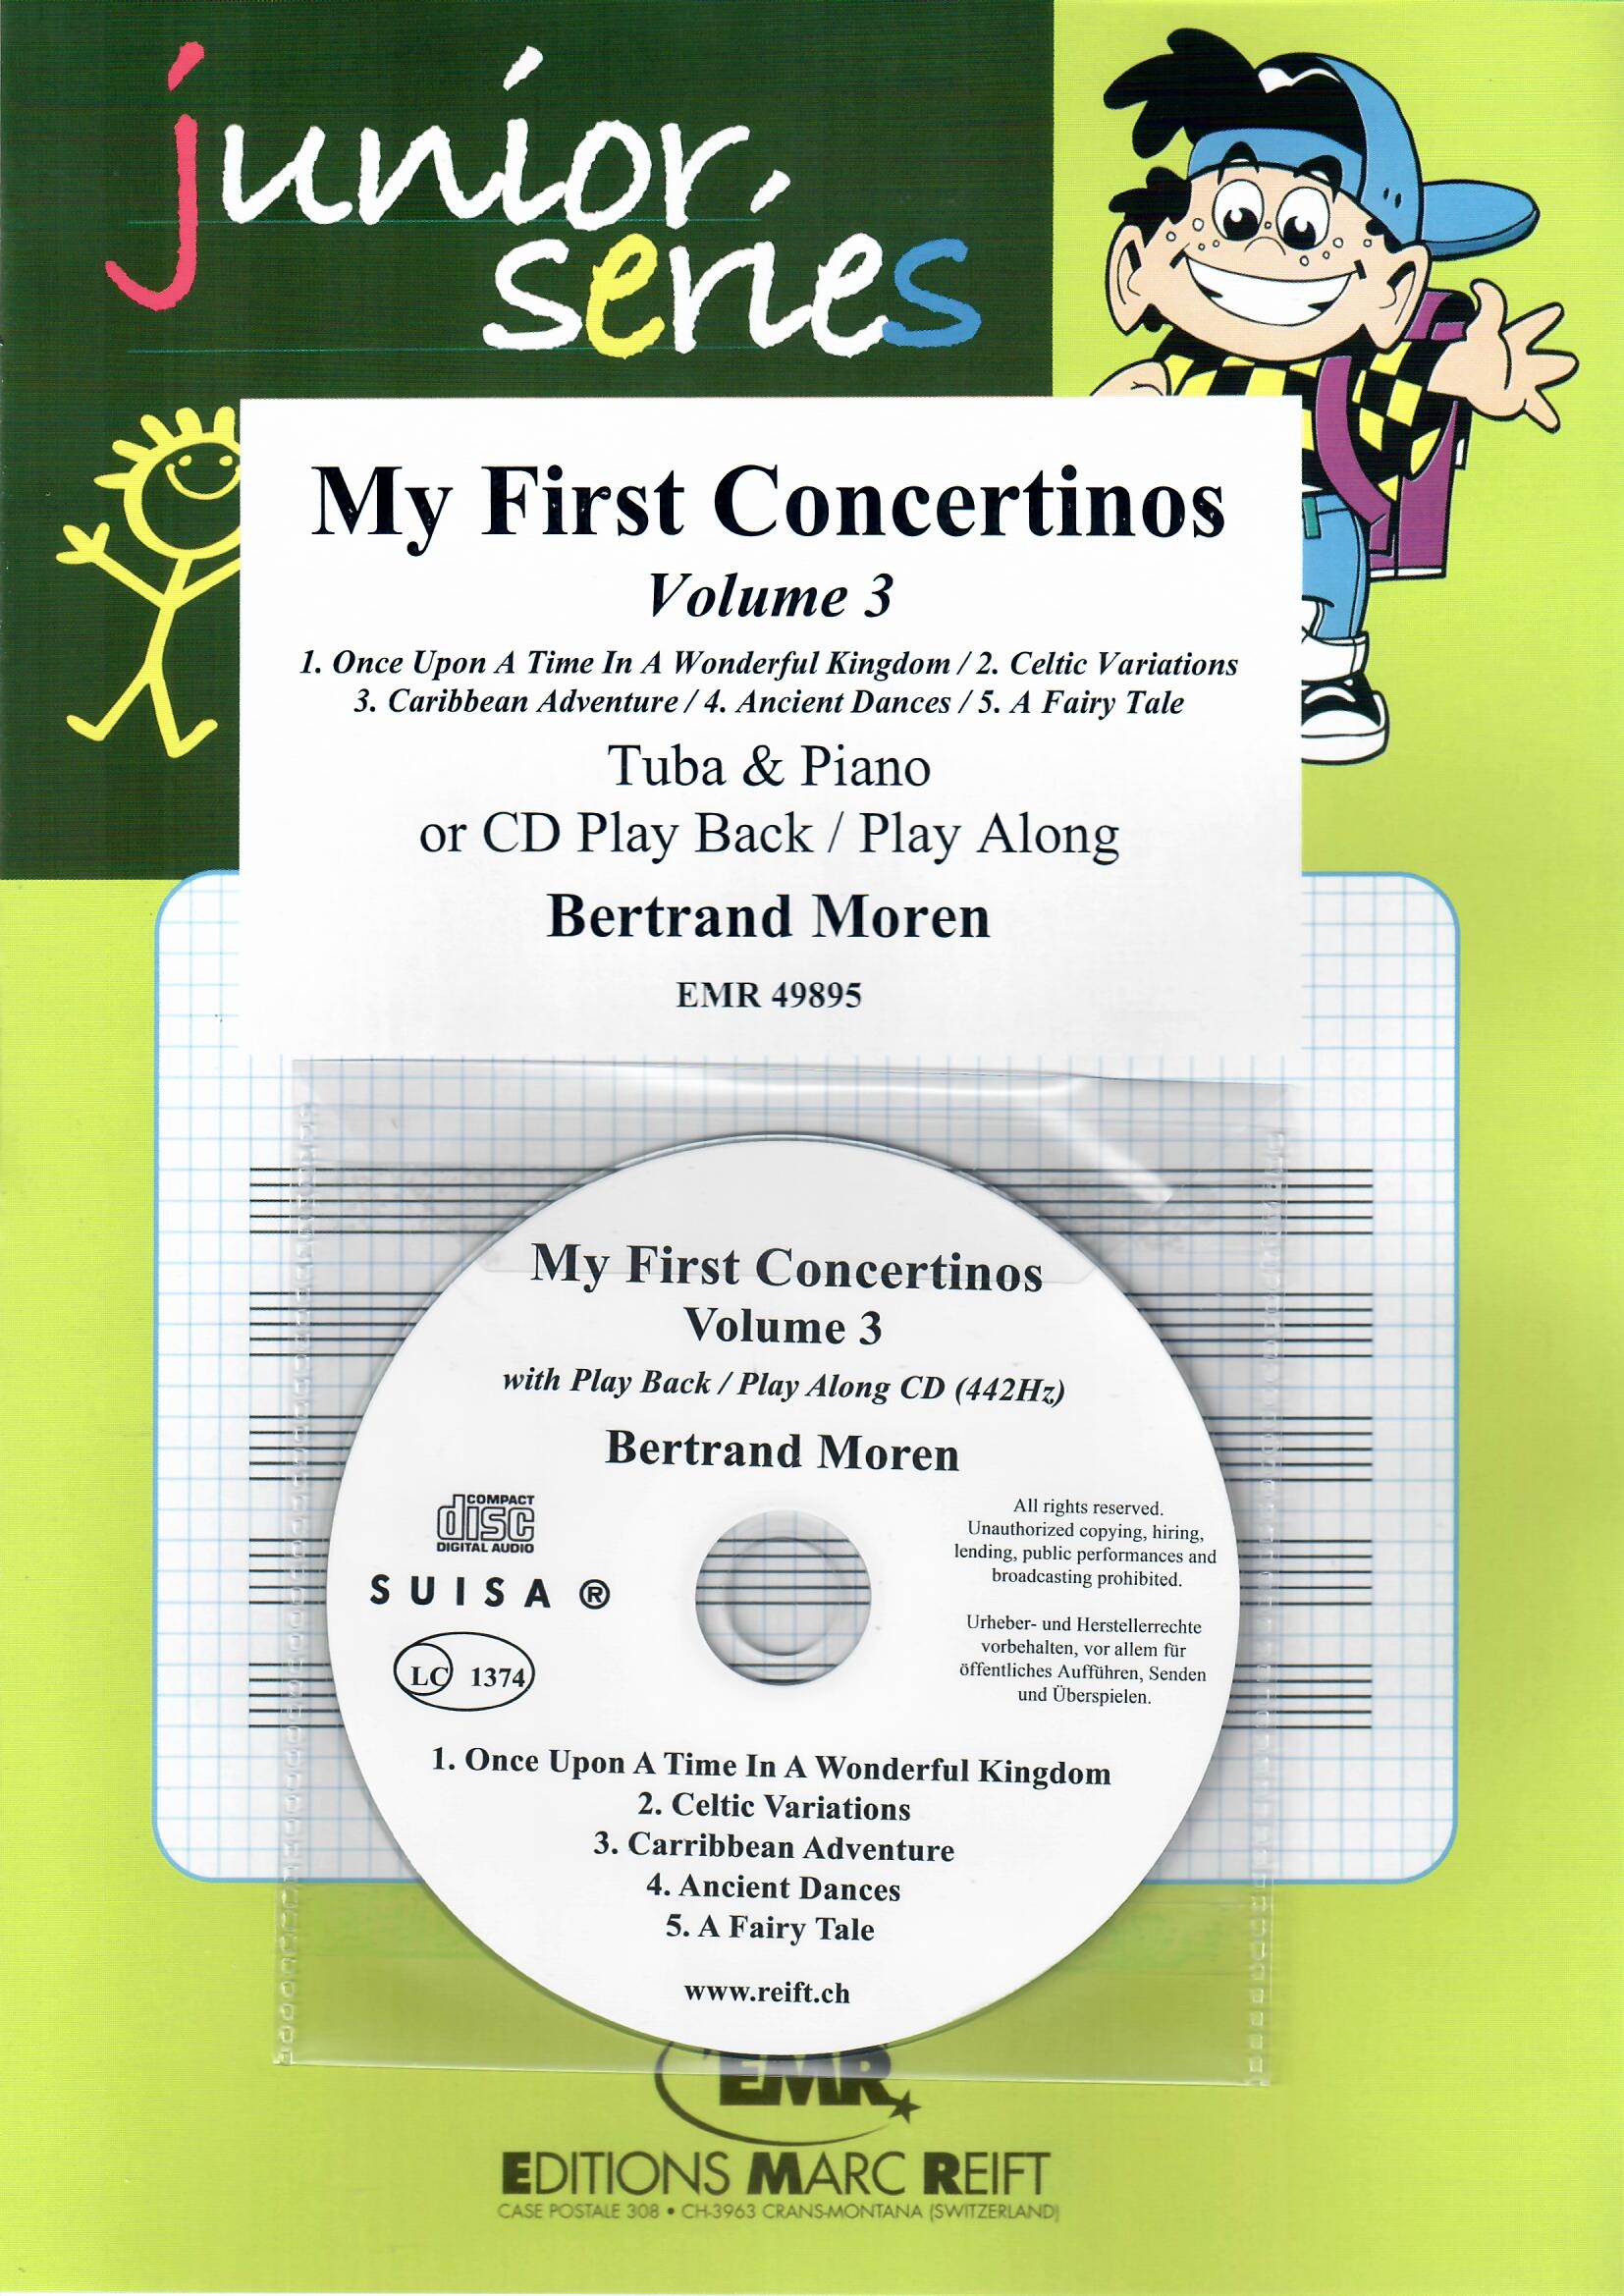 MY FIRST CONCERTINOS VOLUME 3 - Tuba & Piano